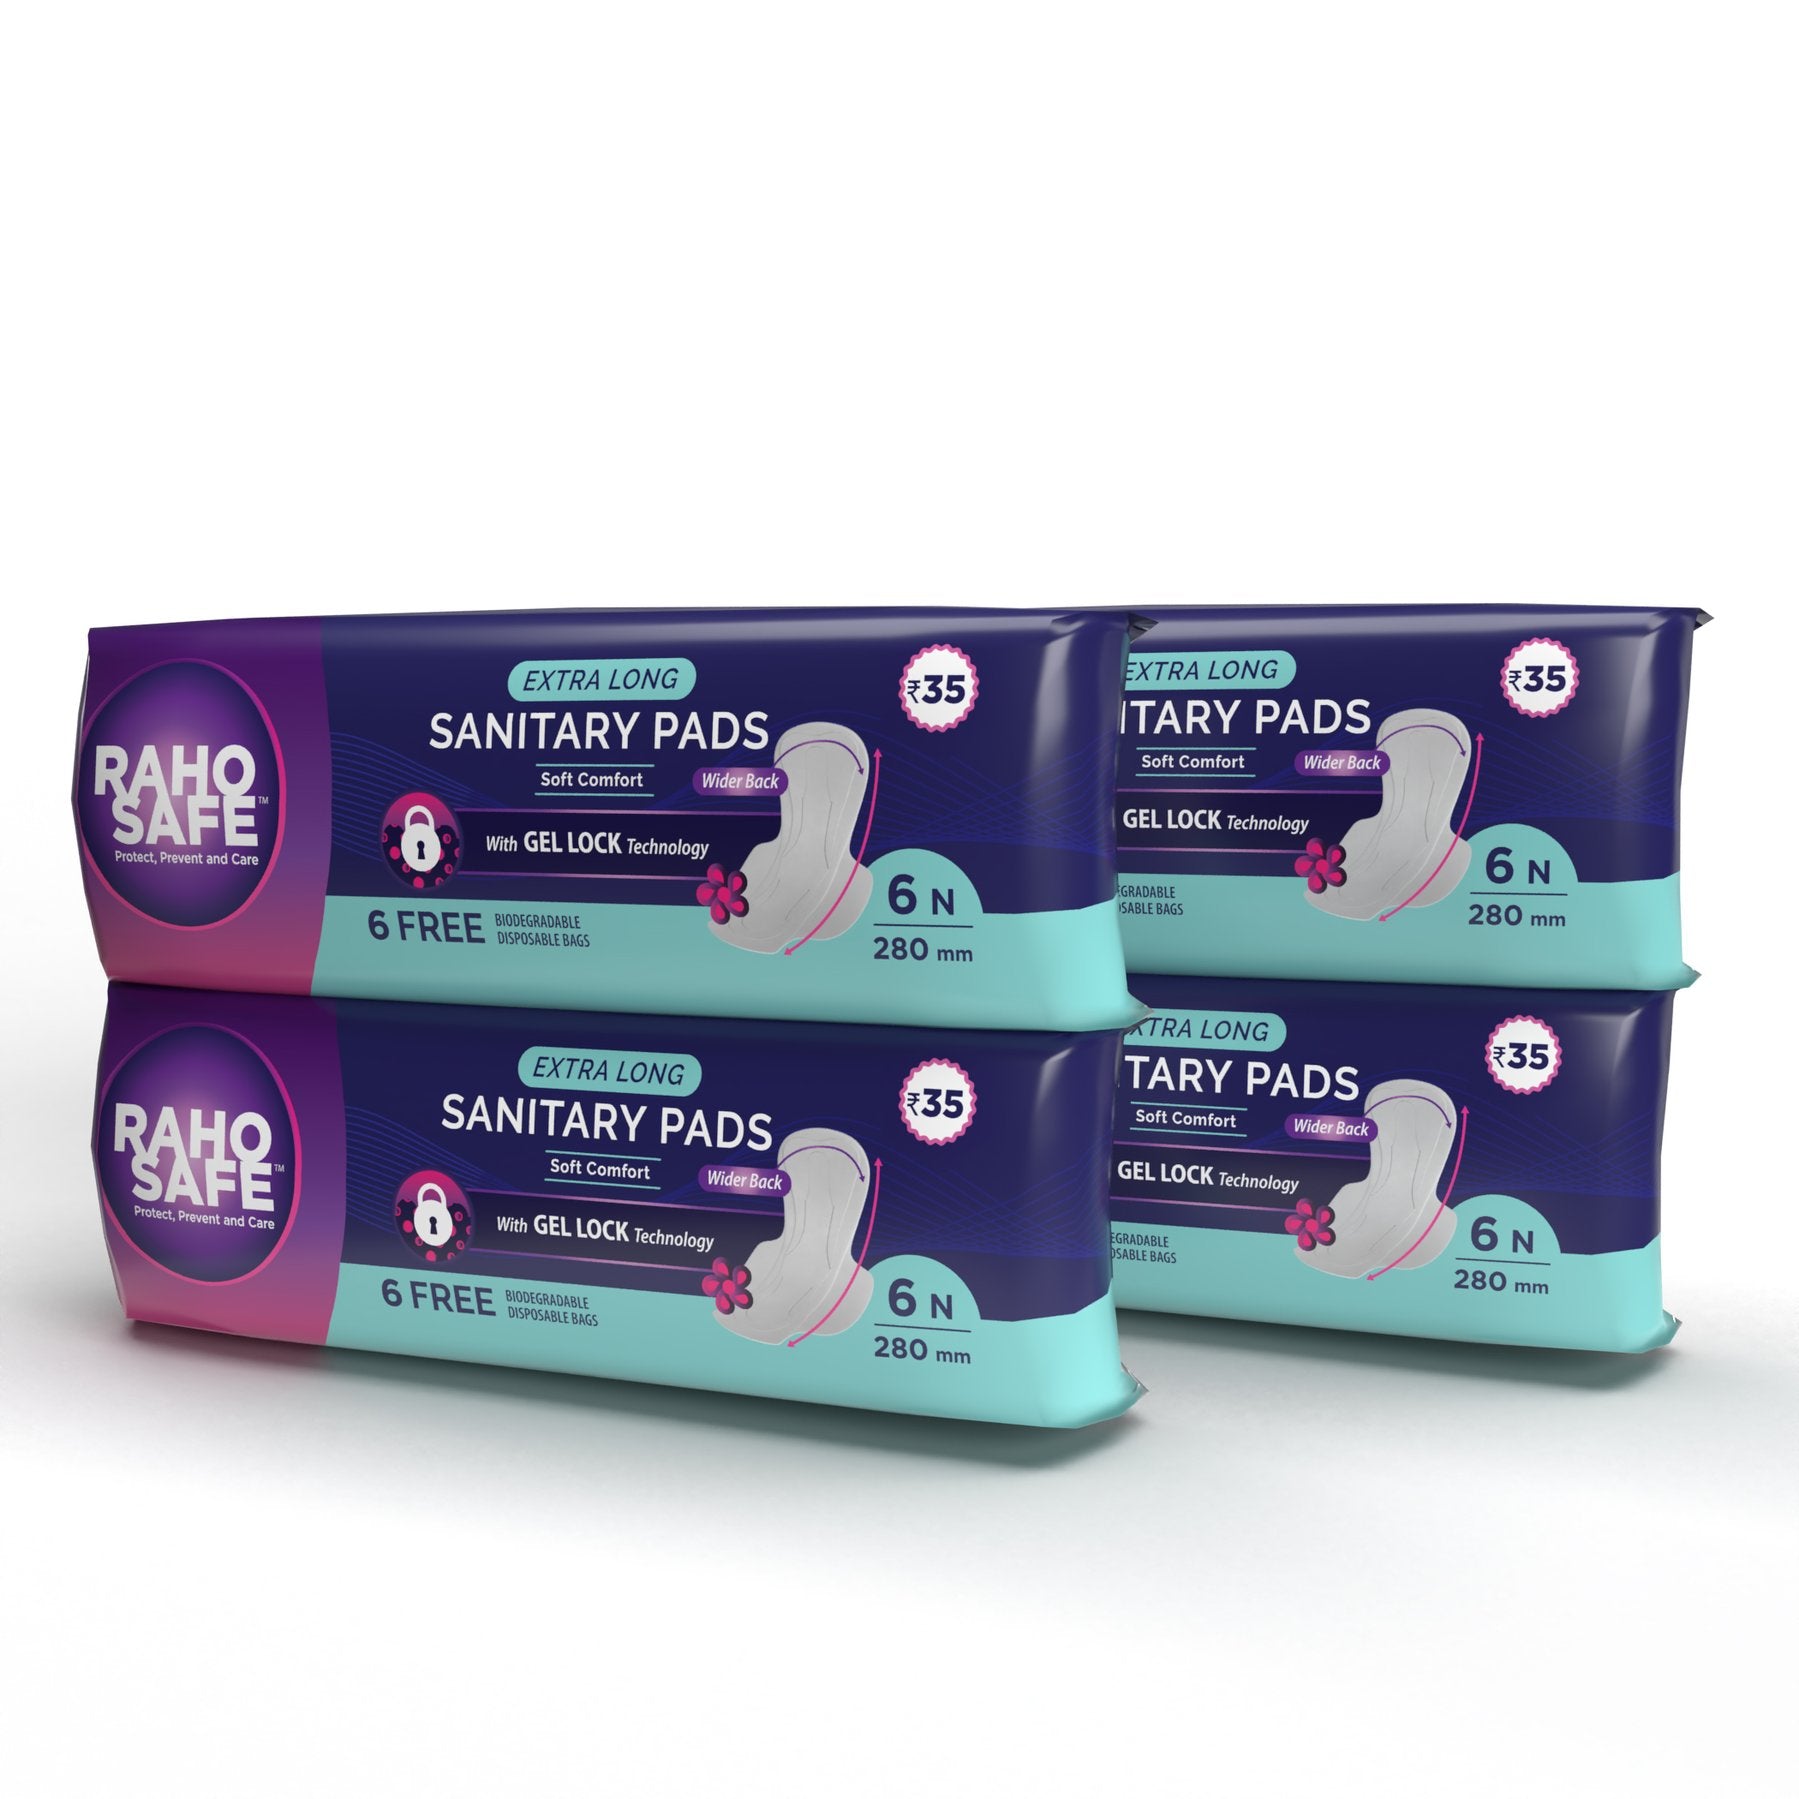 Sanitary Pads - Extra Long 280mm (Pack of 4) - 24 count